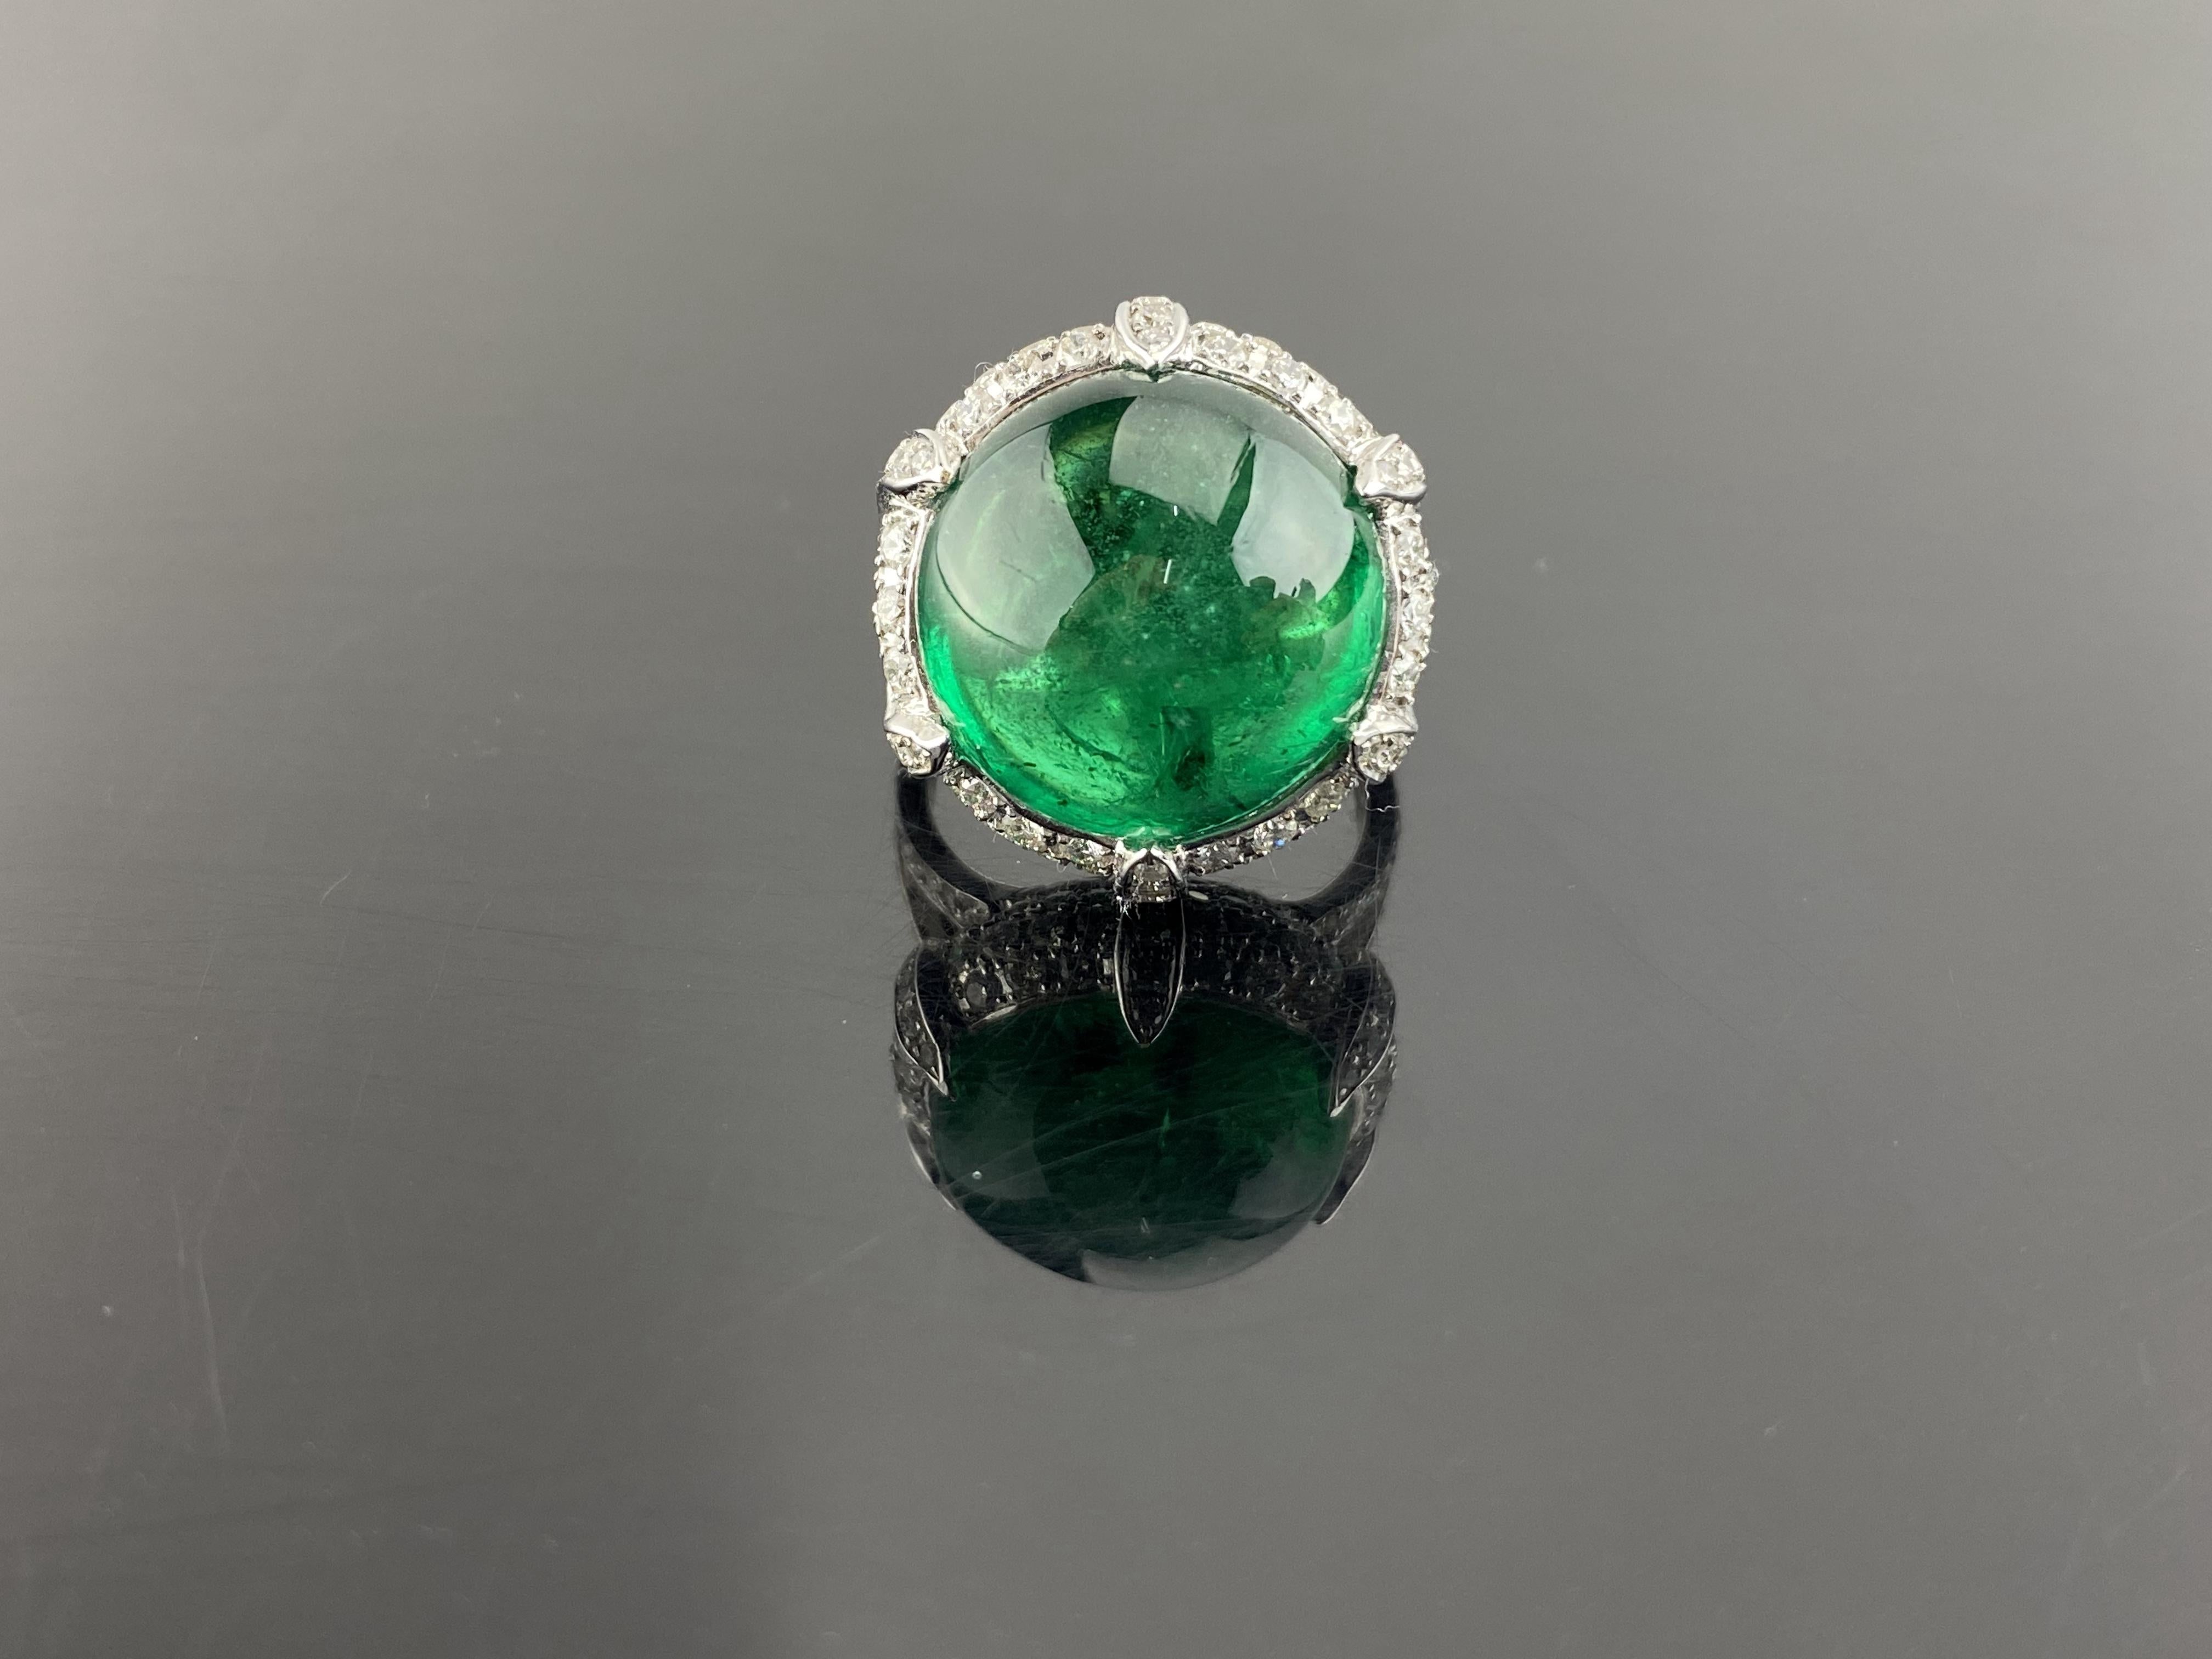 A one of a kind, round shaped cabochon Zambian Emerald weighing 19.30 carats with 2.15 carats of VS quality White Diamonds, all set in 18K solid White Gold. The center stone Emerald is transparent, with a an ideal vivid green color and a beautiful